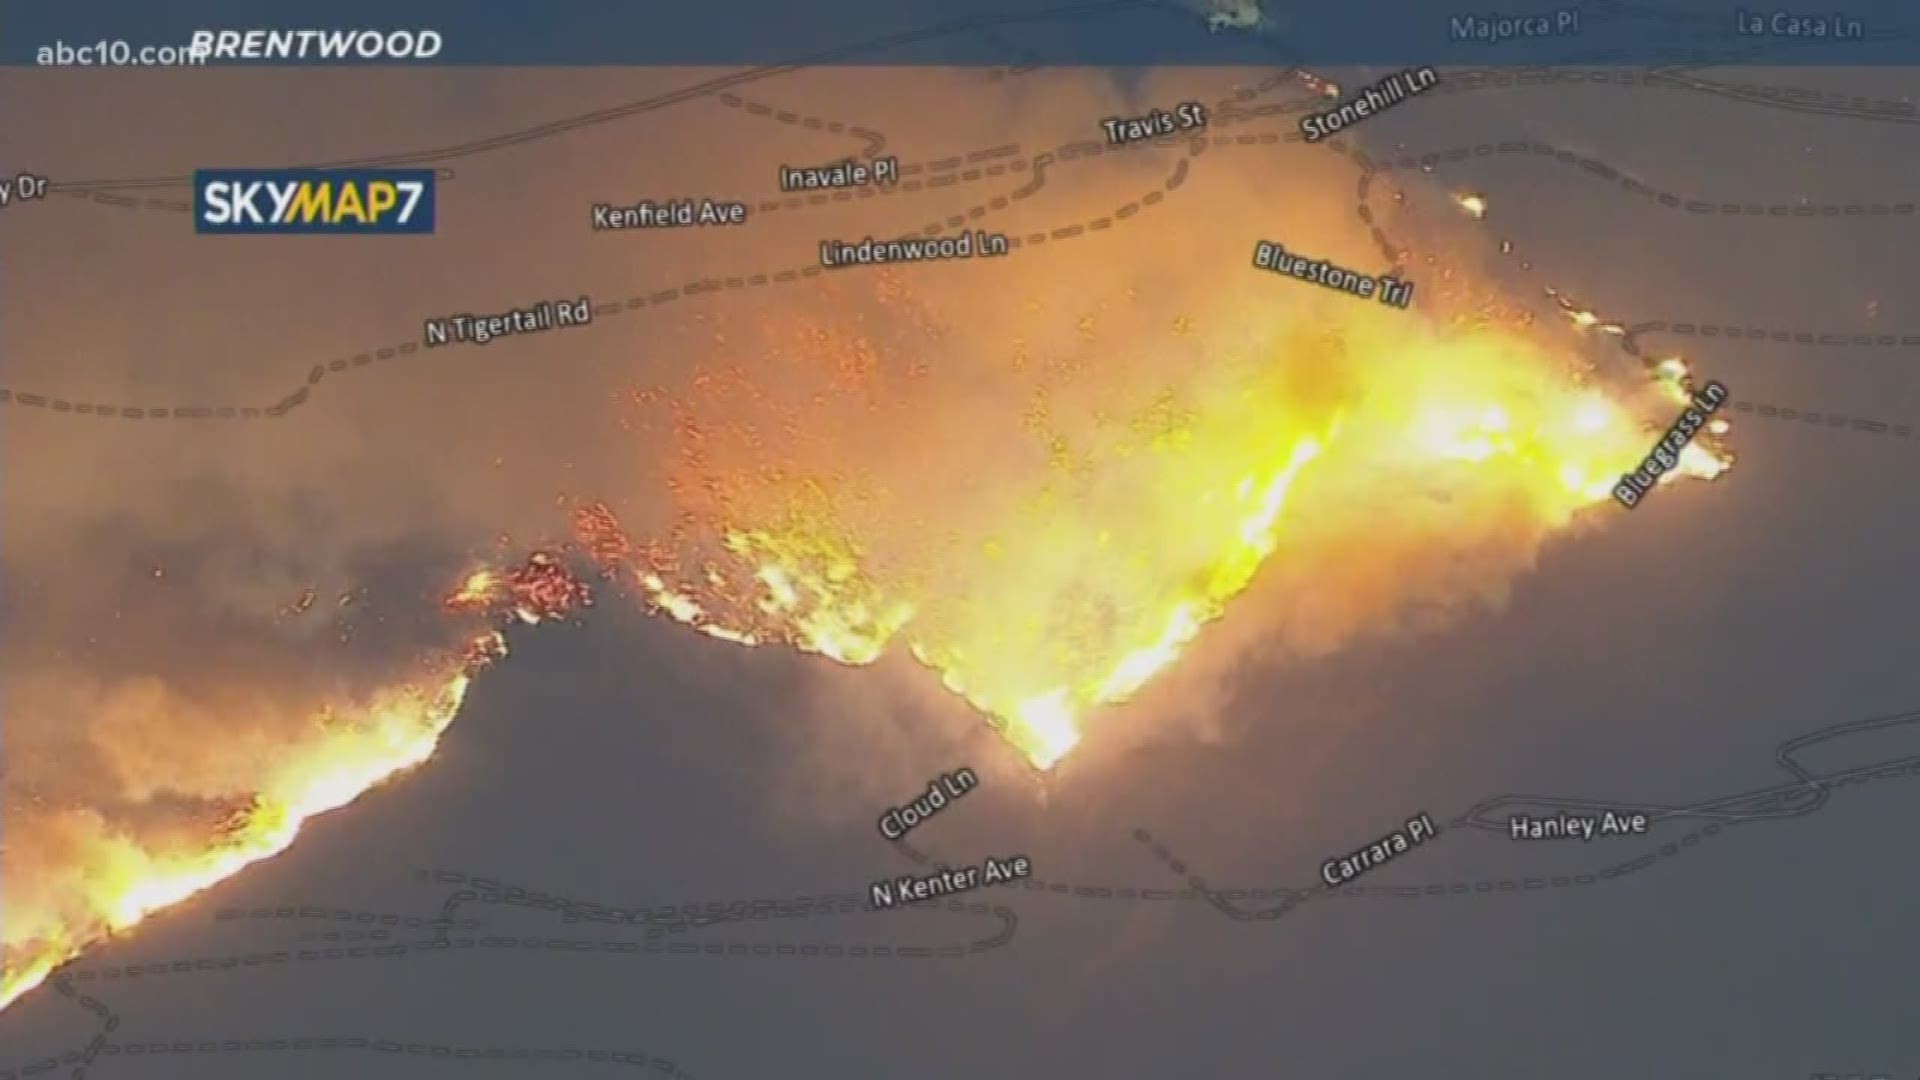 The Getty Fire, a Southern California fire, has grown to more than 250 acres and around 3,300 homes are under mandatory evacuation orders.